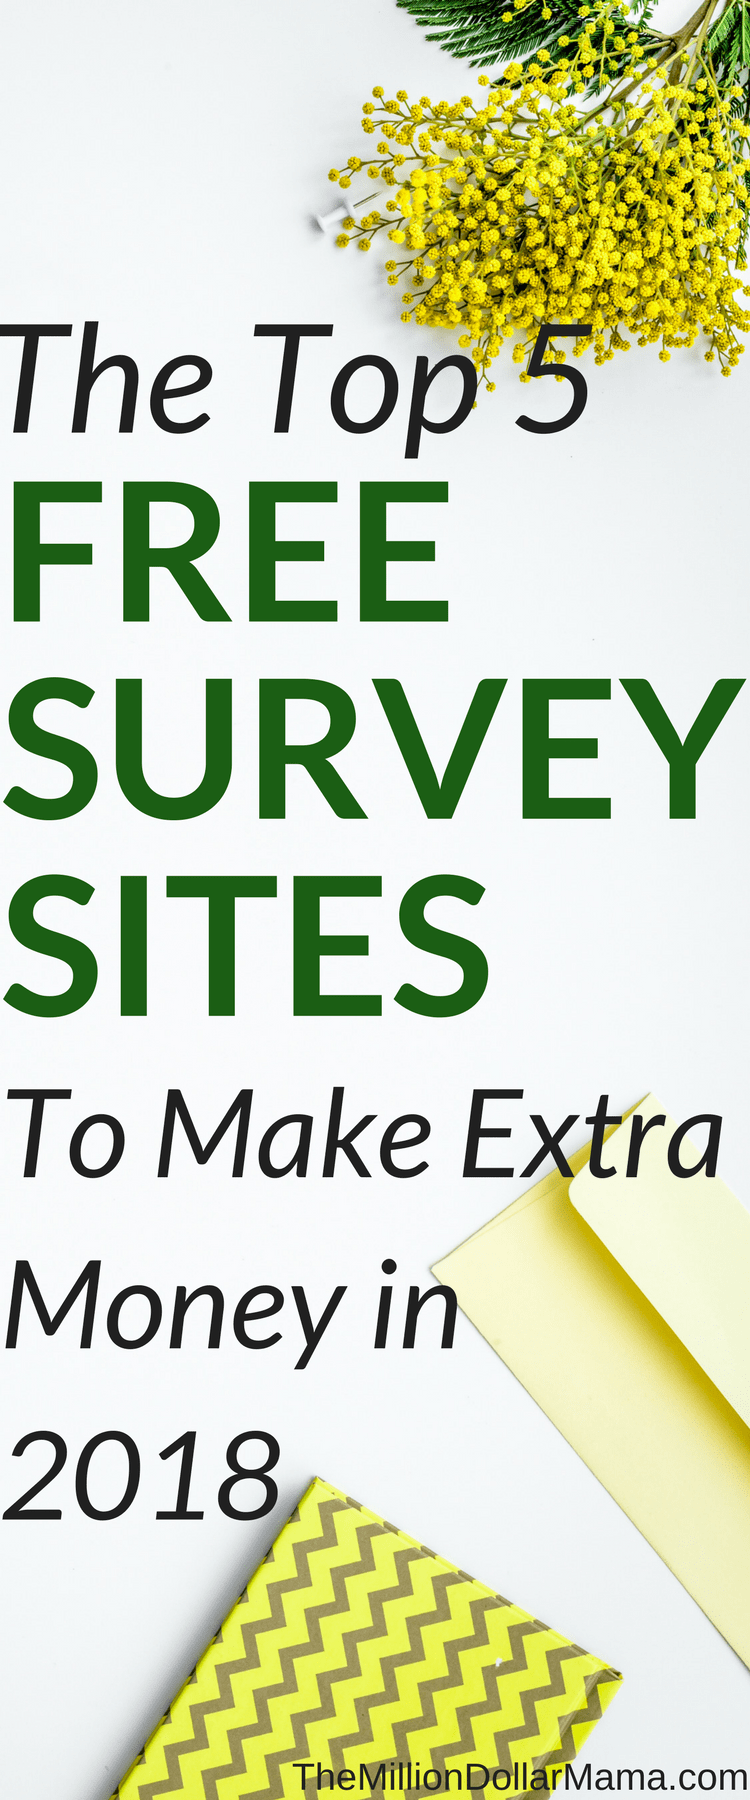 The Best Survey Sites To Make Extra Money This Year - These are the sites I recommend if you want to make some extra cash online from home!